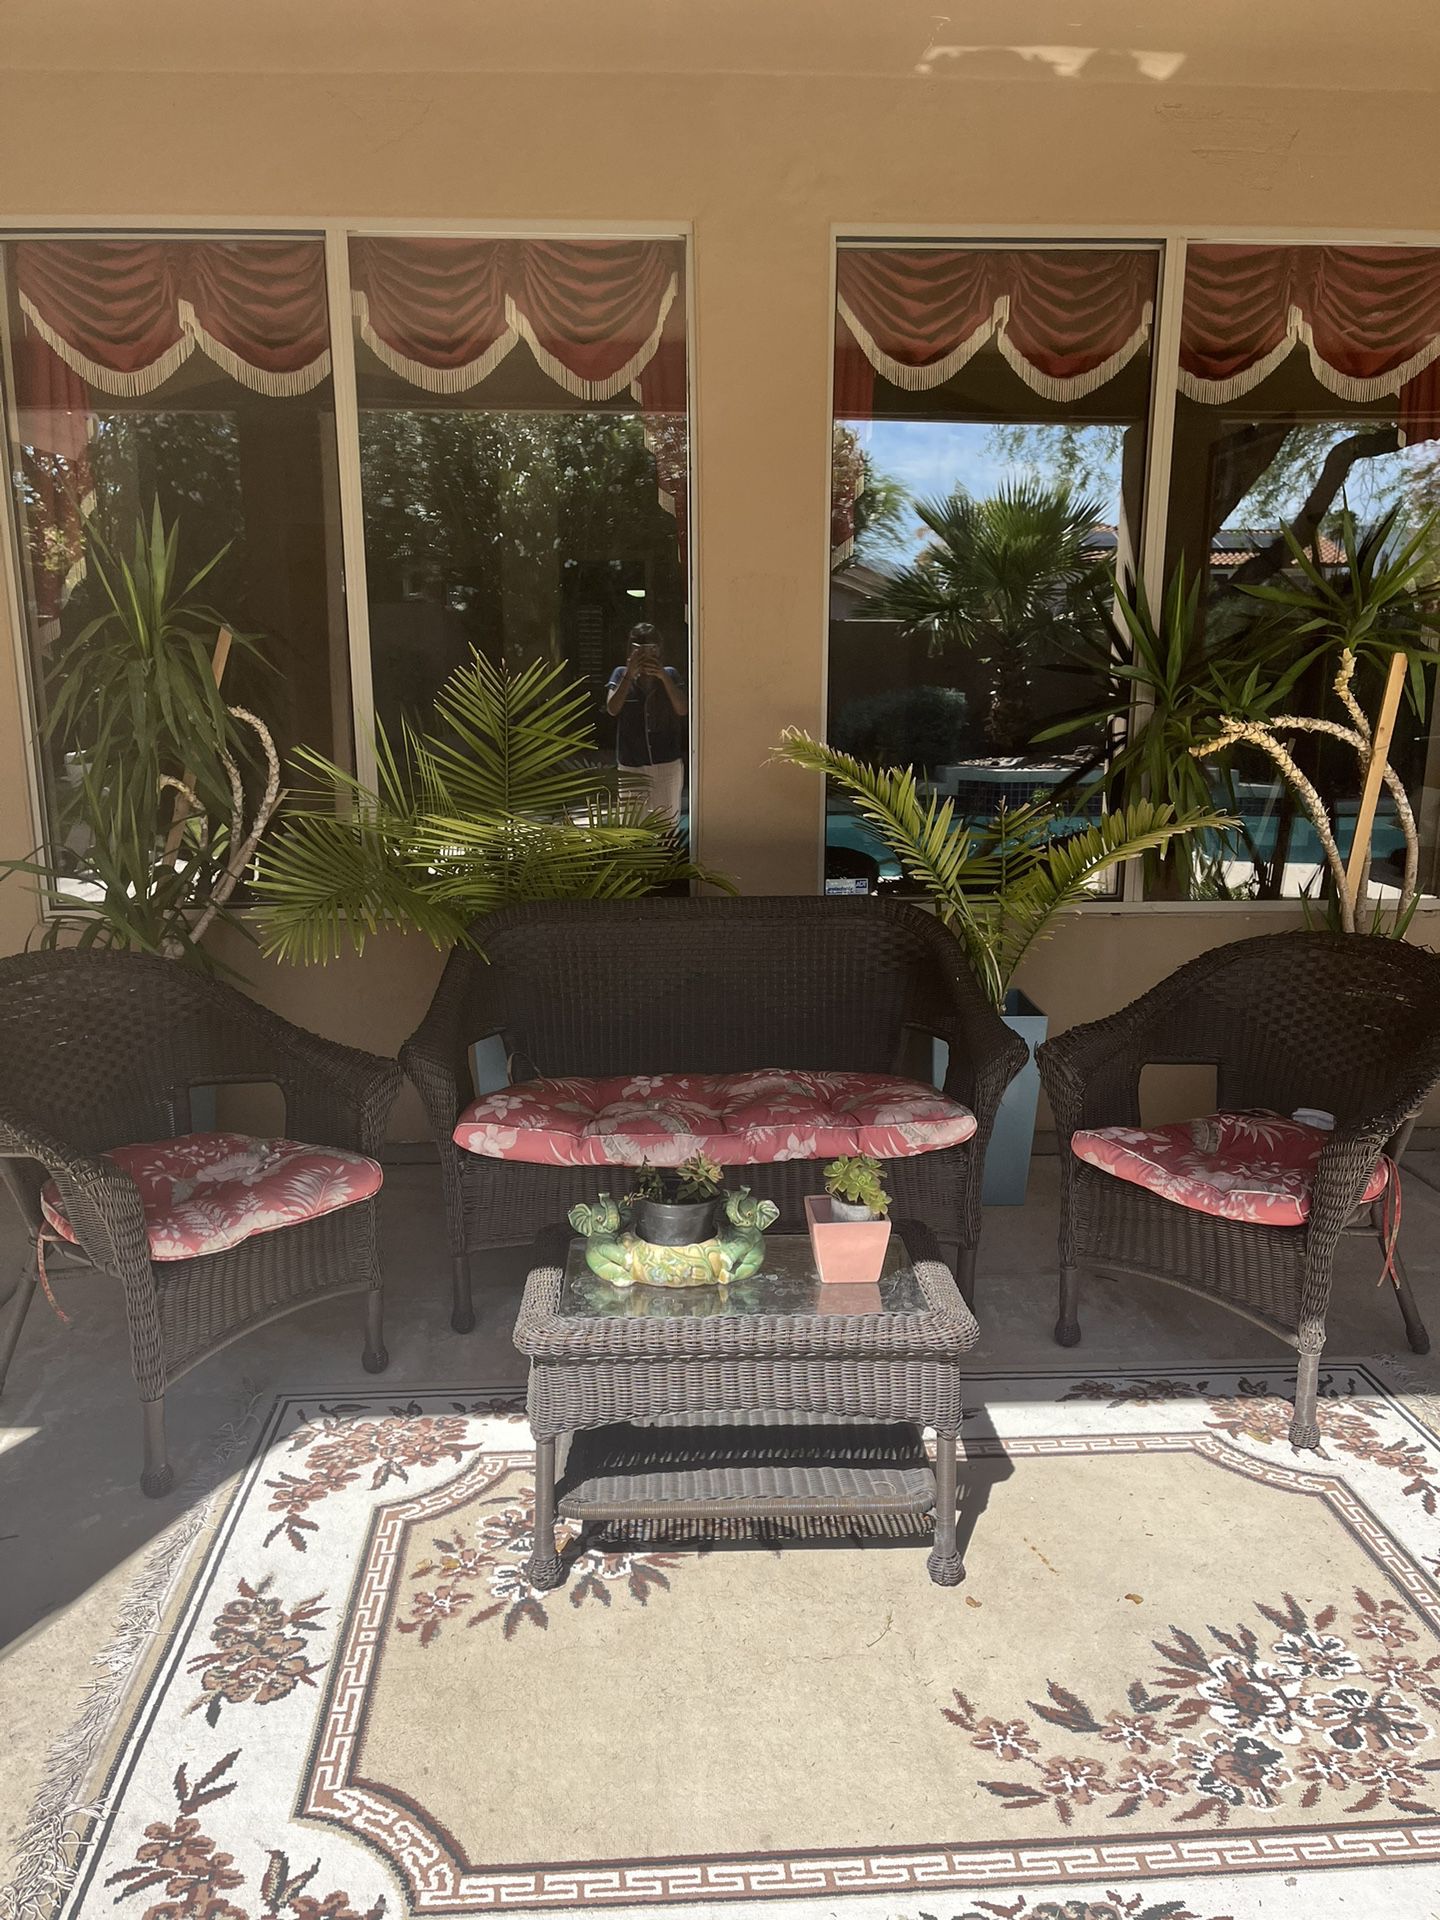 Outdoor patio furniture in good condition